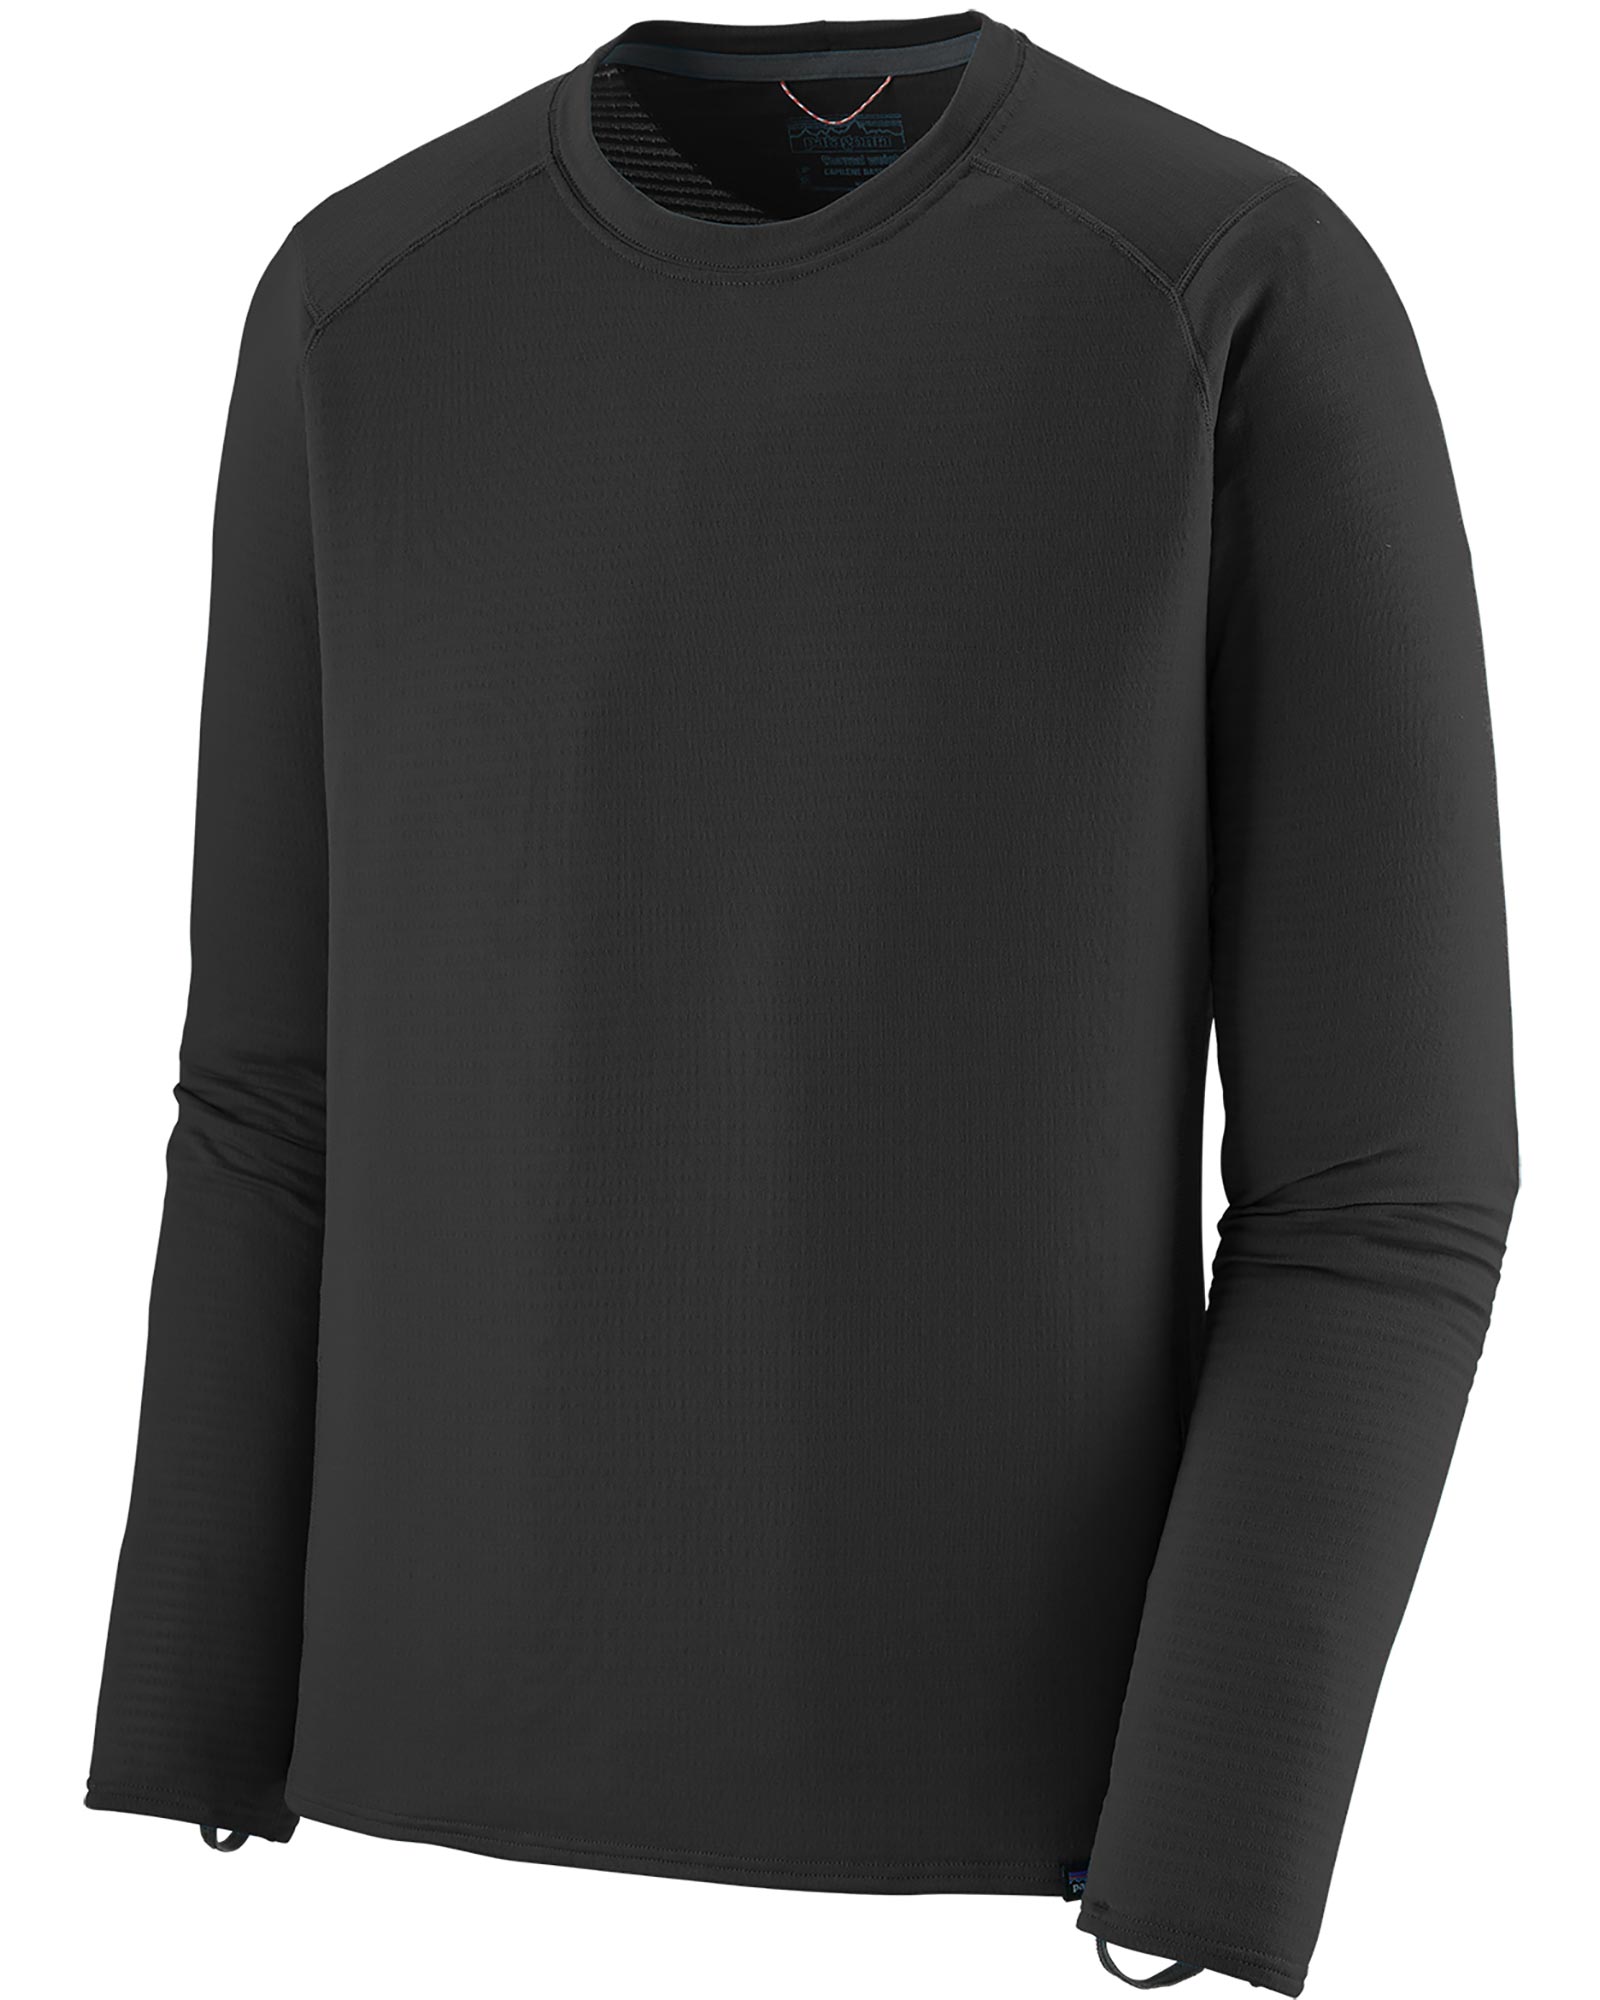 Patagonia Capilene Mens Thermal Weight Crew Neck